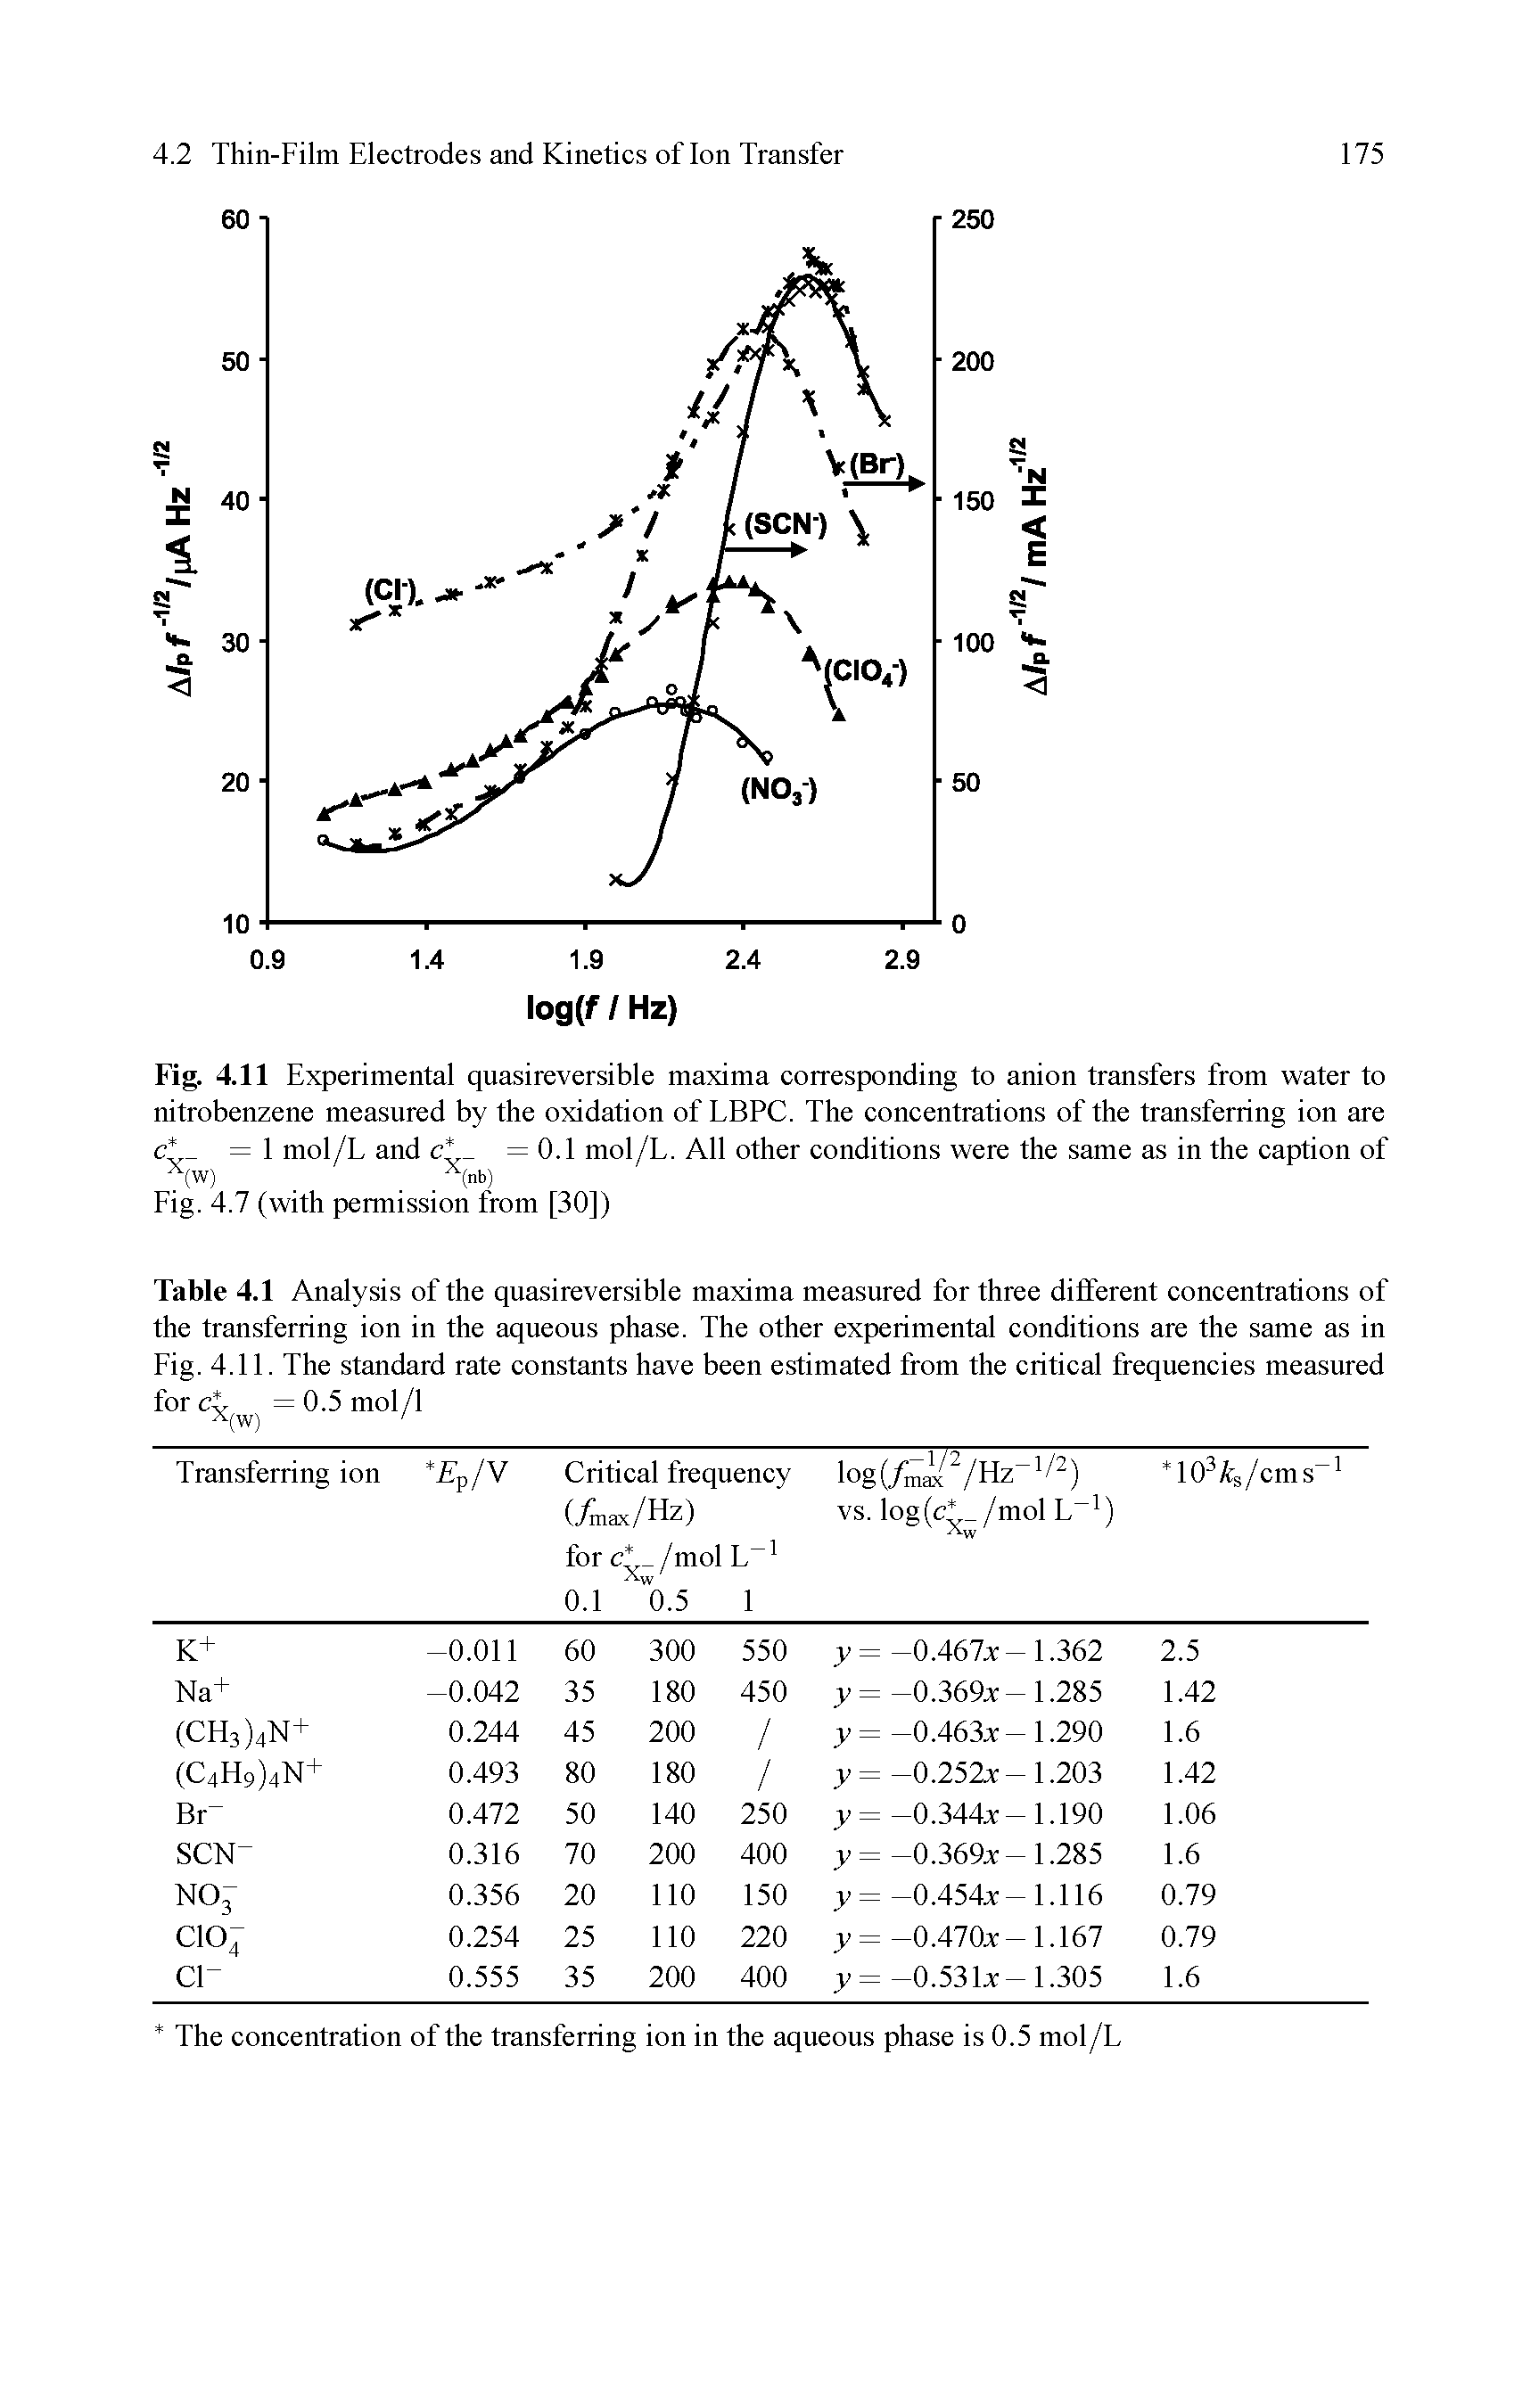 Fig. 4.11 Experimental quasireversible maxima corresponding to anion transfers from water to nitrobenzene measured by the oxidation of LBPC. The concentrations of the transferring ion are c = 1 mol/L and c =0.1 mol/L. All other conditions were the same as in the caption of...